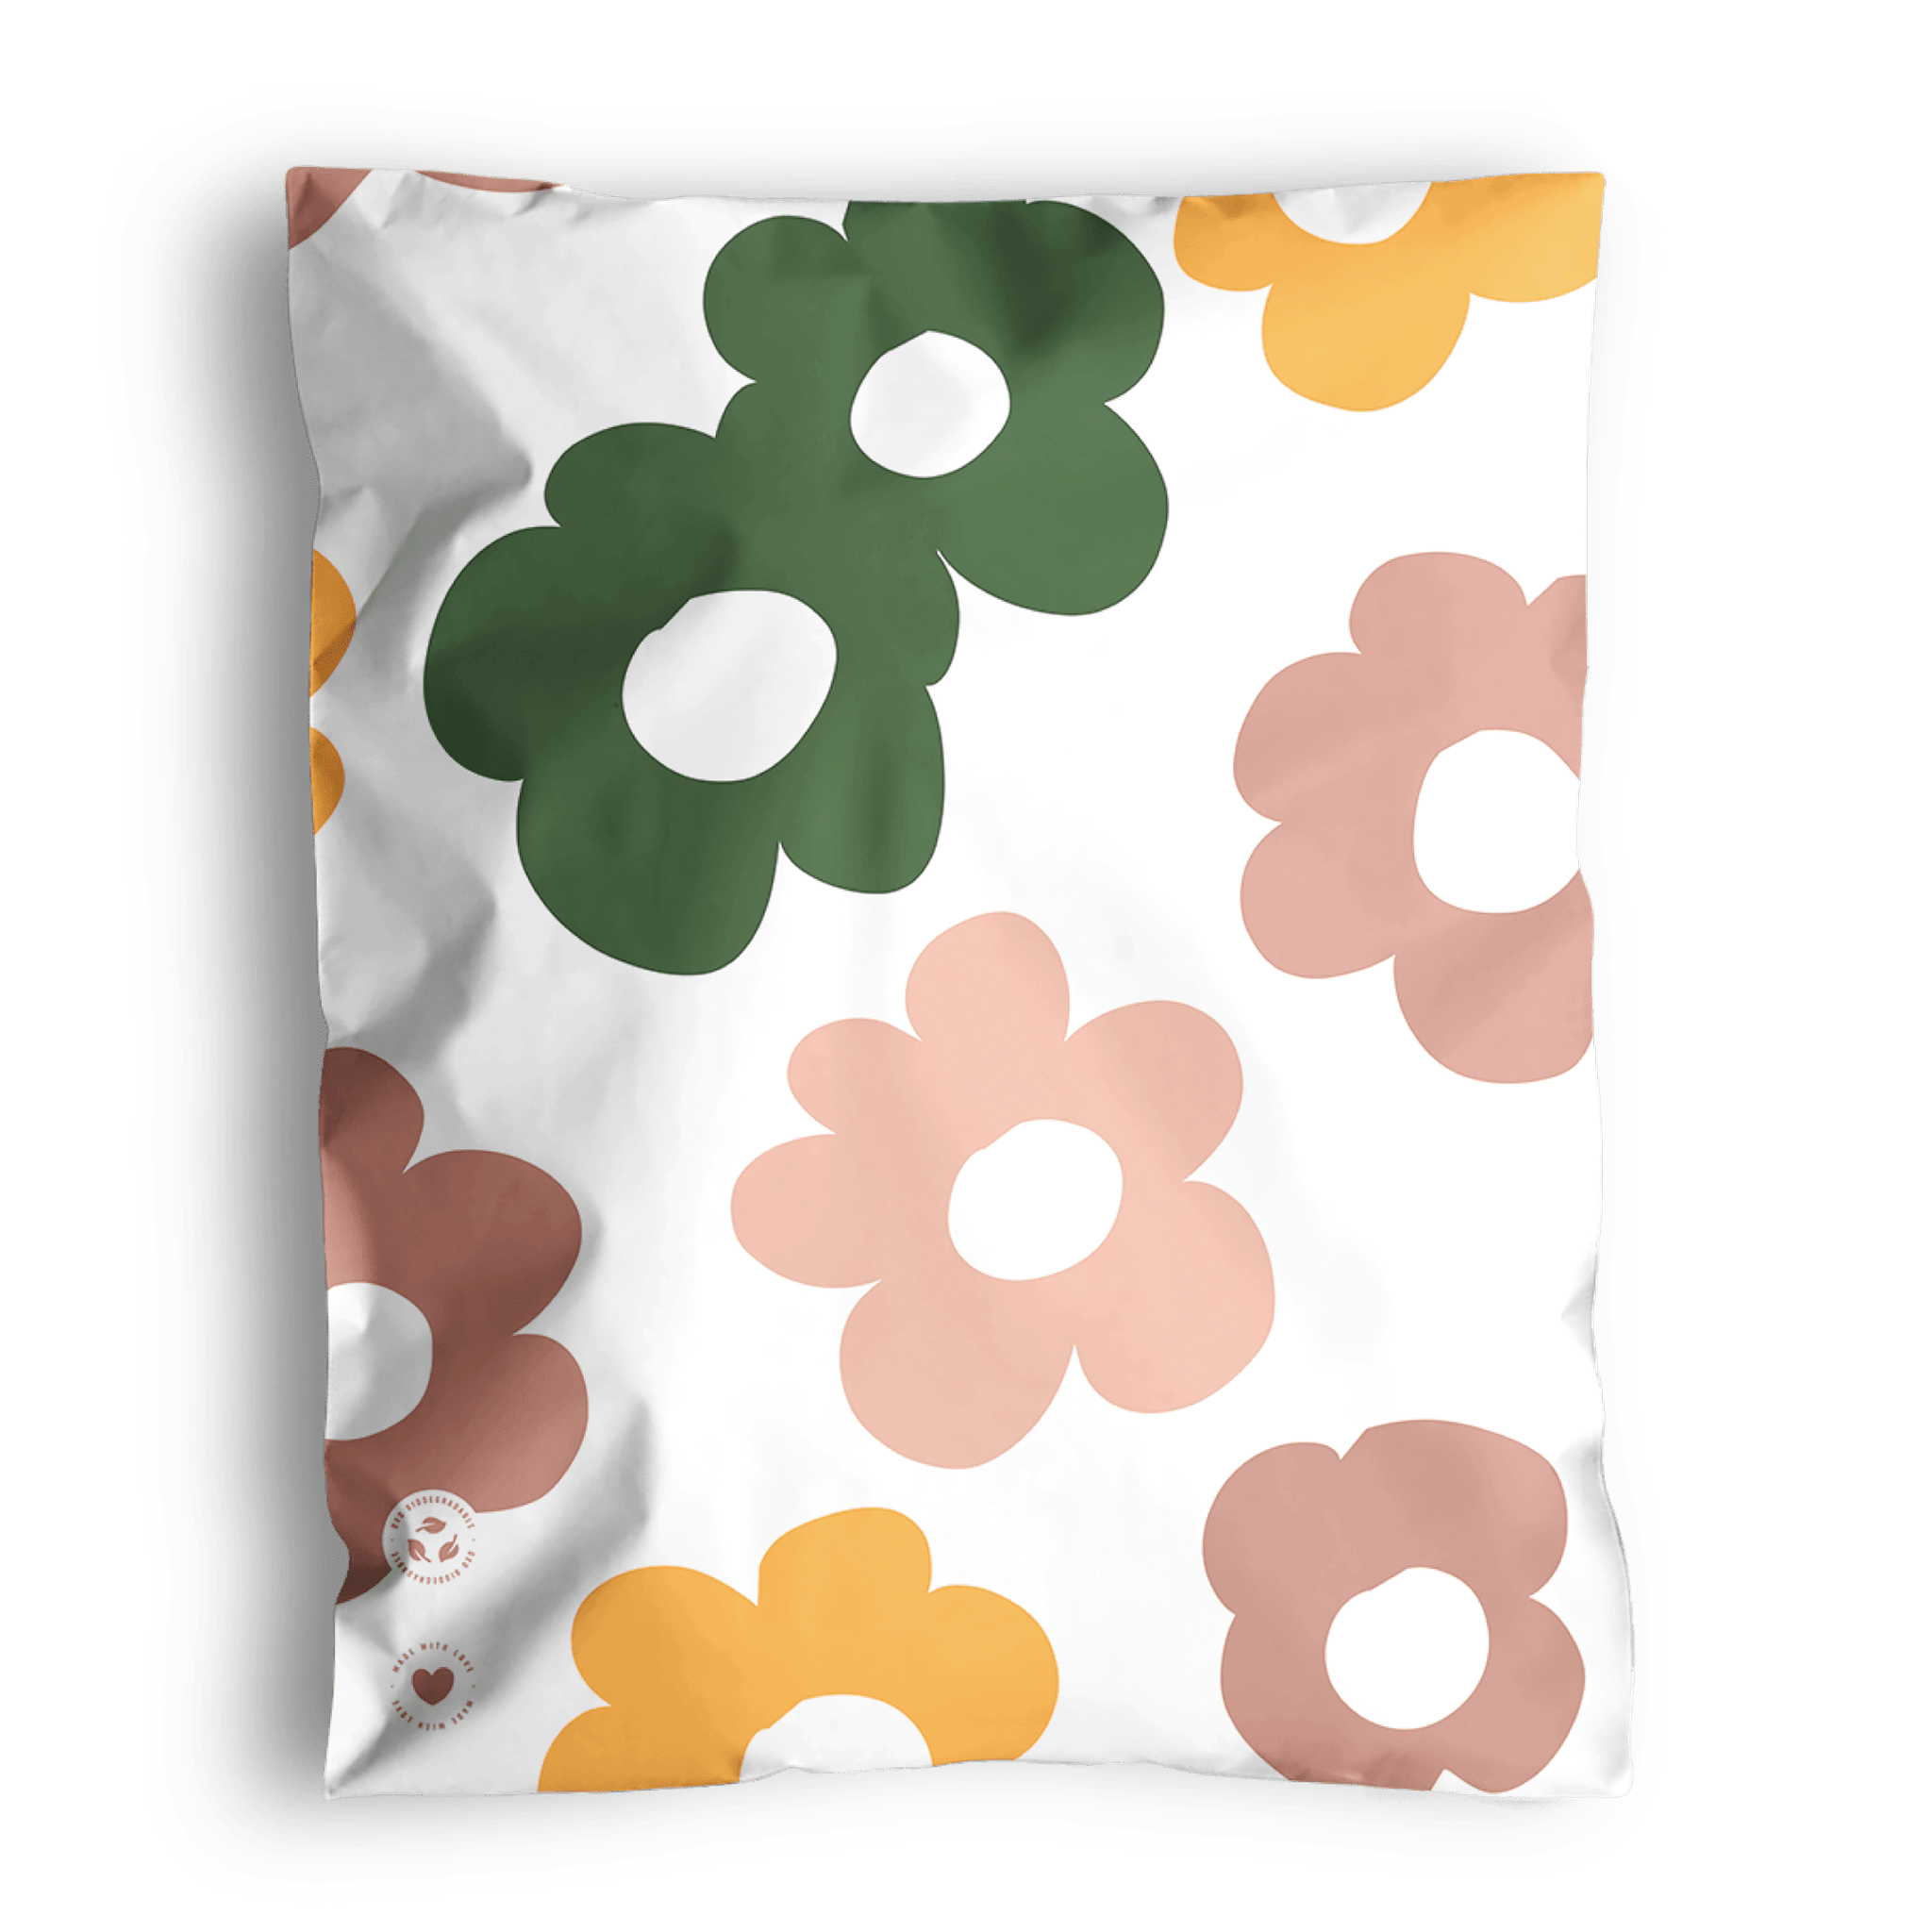 Graphic floral print pillow on a solid background, shipped in impack.co Daisy Multicolor Biodegradable Mailers 10" x 13".